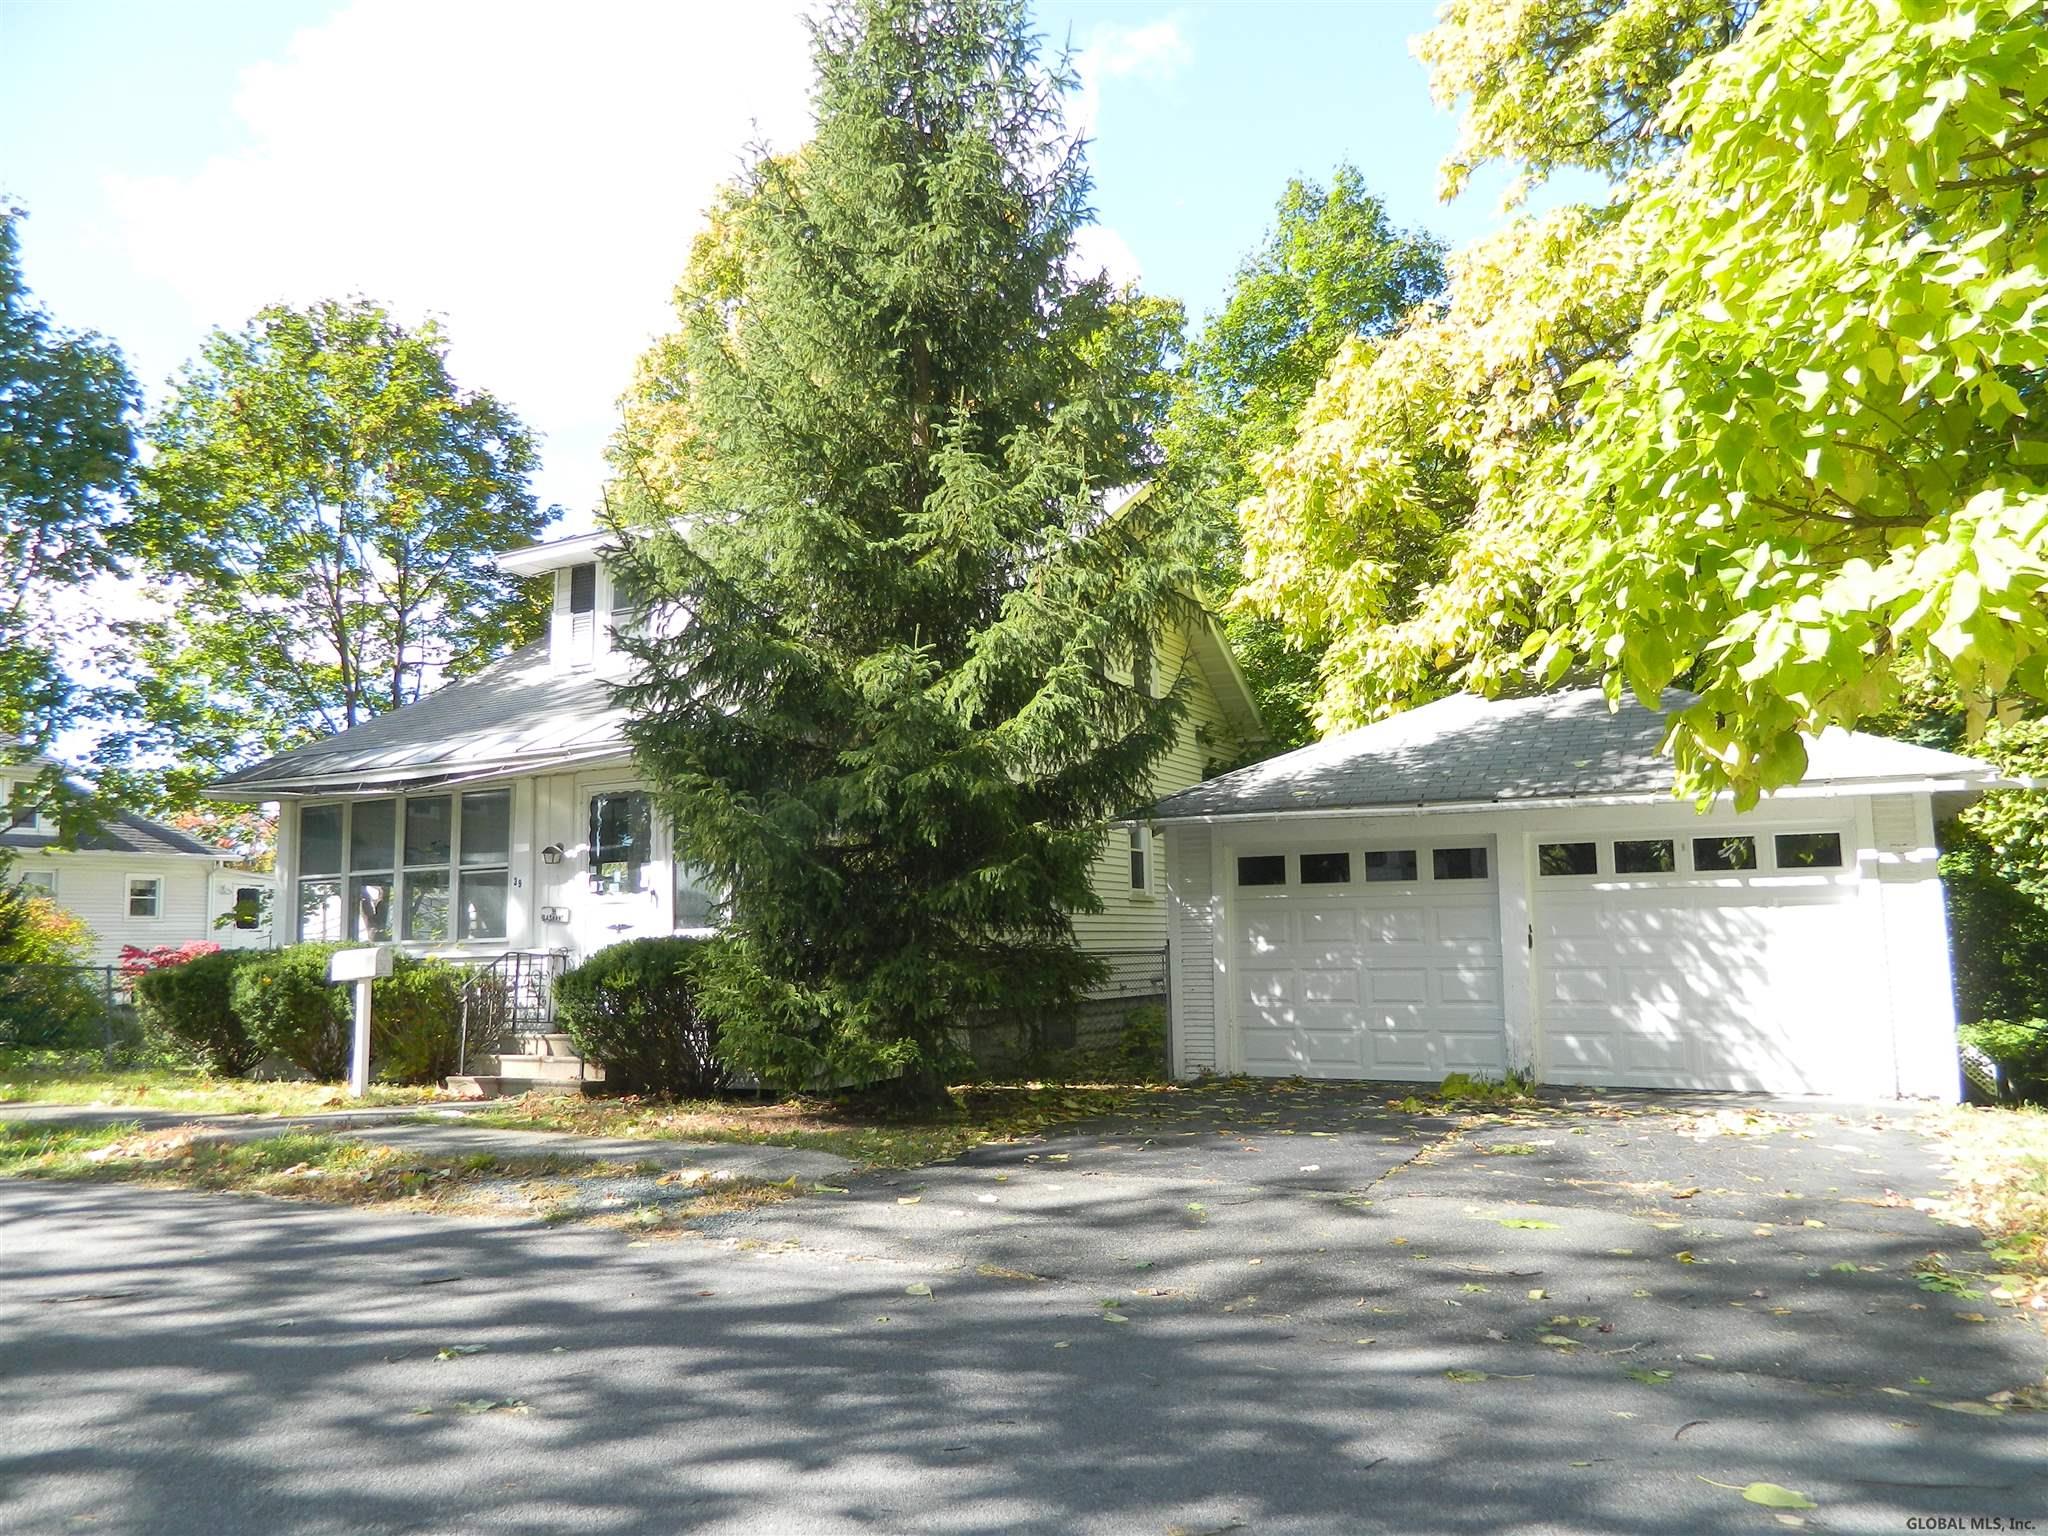 39 MUNGER ST in Rensselaer, NY Listed For 85,000.00 by